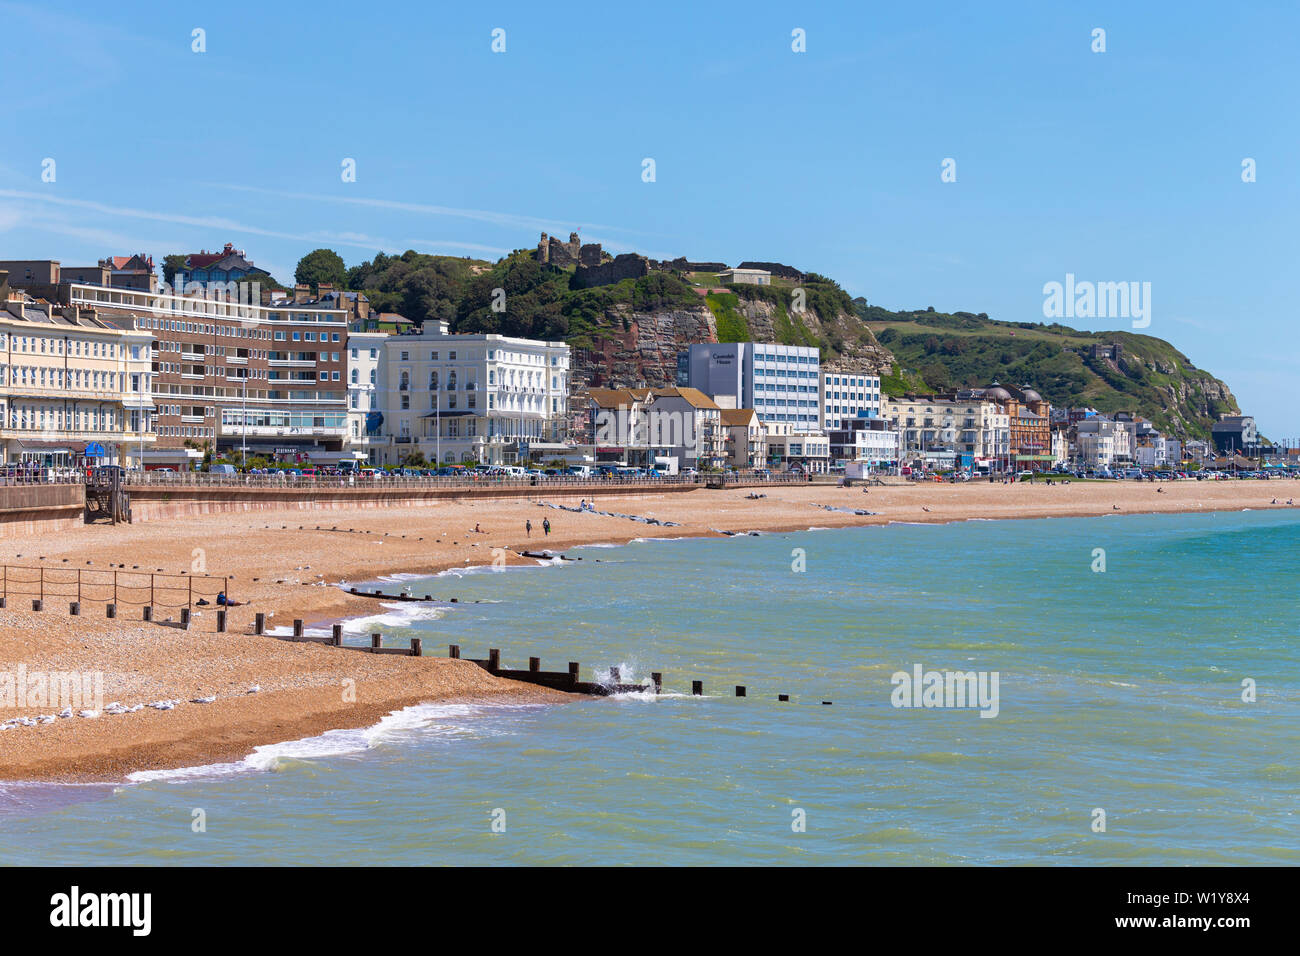 Hastings seafront and beach, east sussex, uk Stock Photo